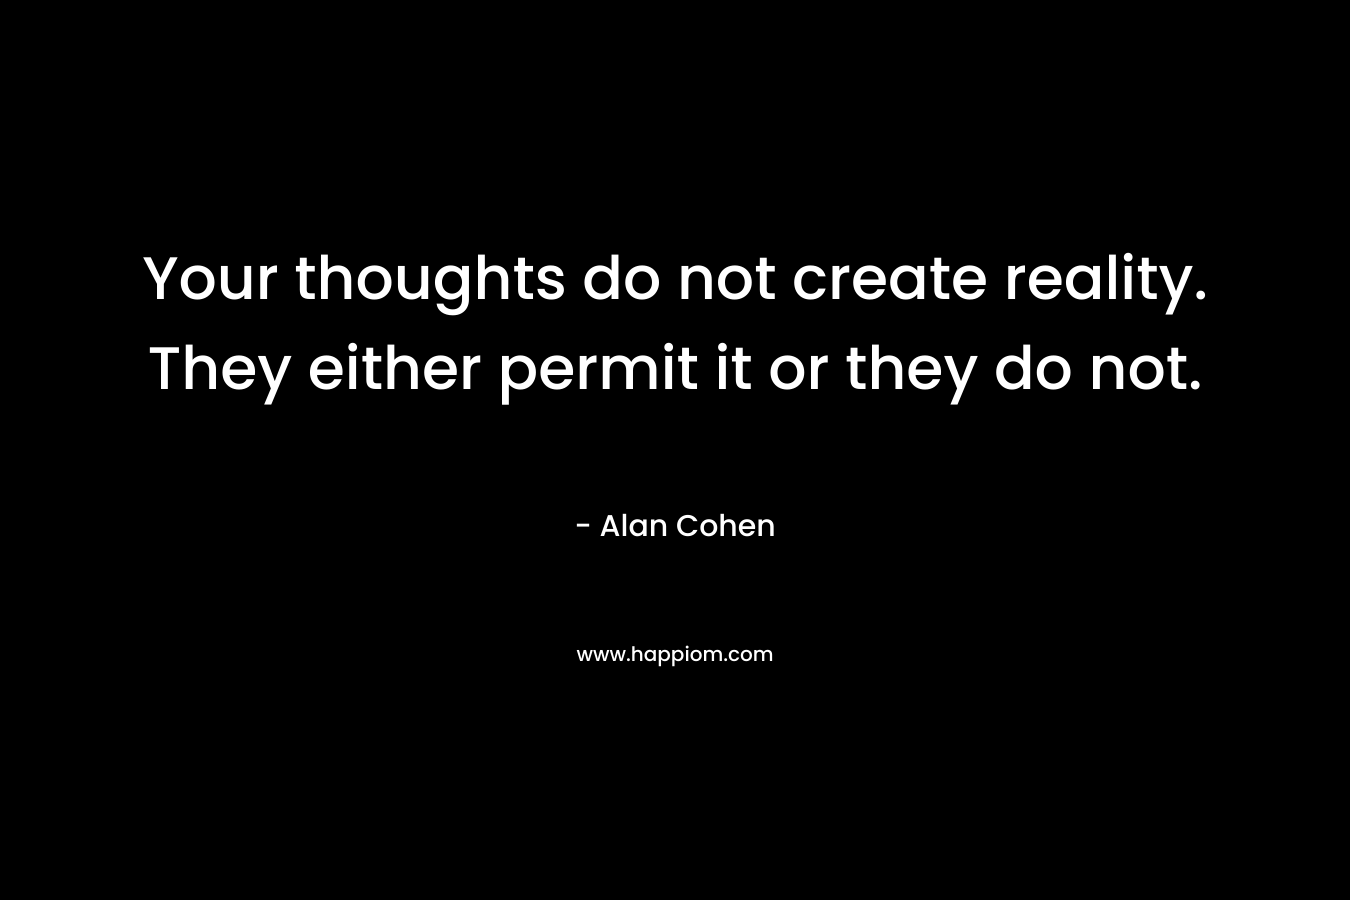 Your thoughts do not create reality. They either permit it or they do not.